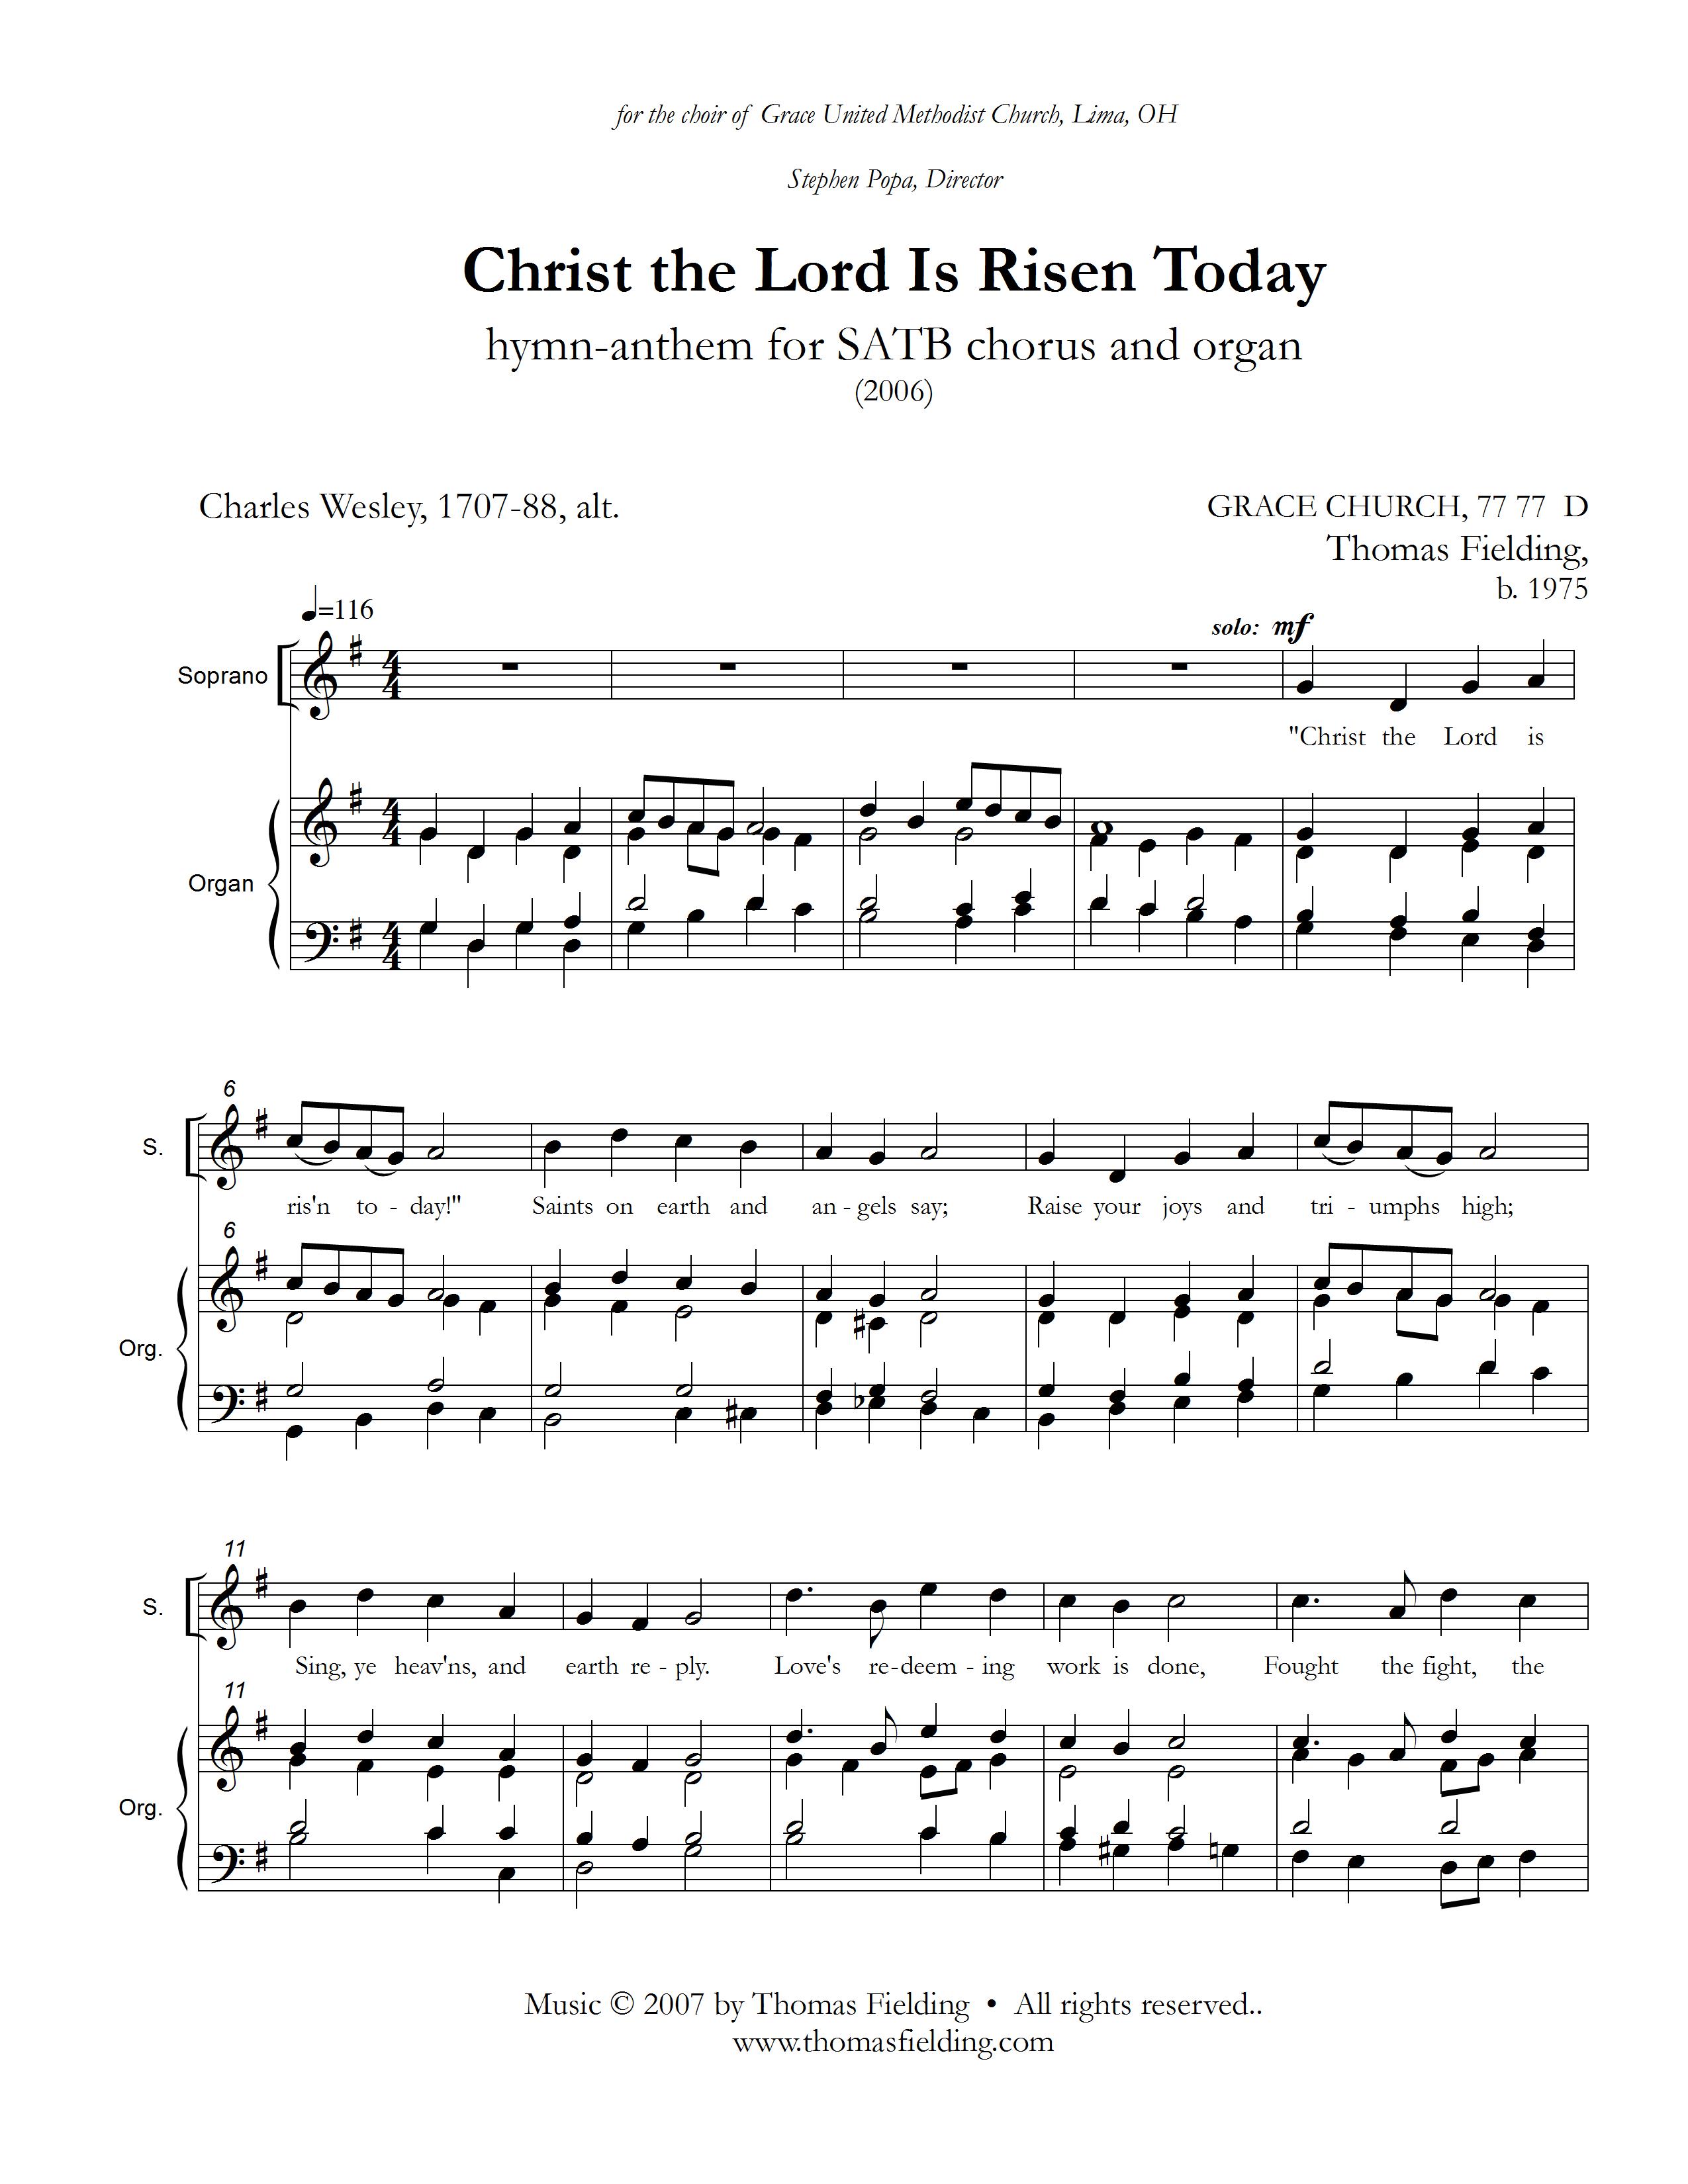 ChristTheLord page one